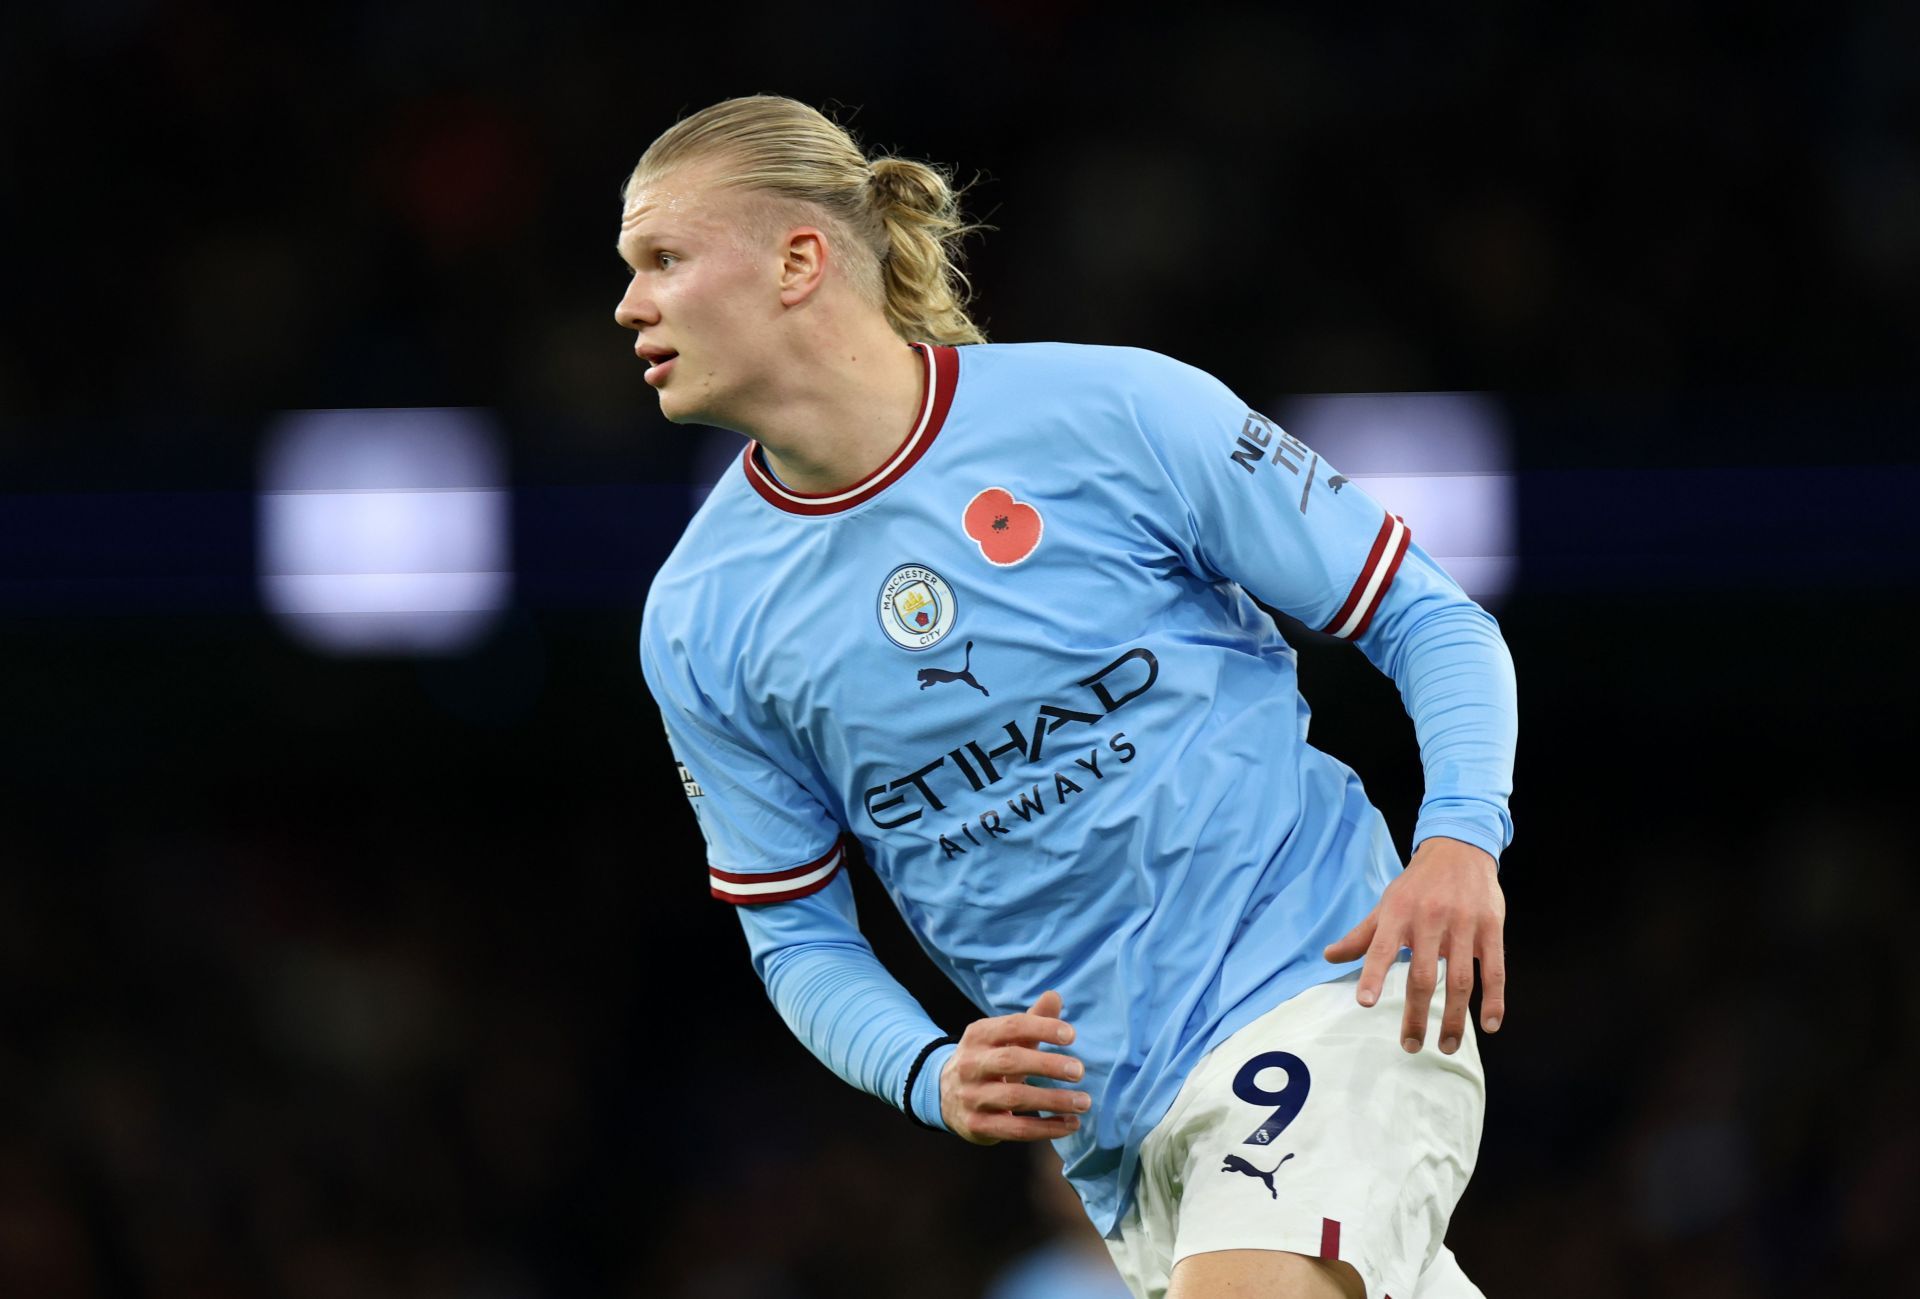 Erling Haaland has been imperious for Manchester City this season.